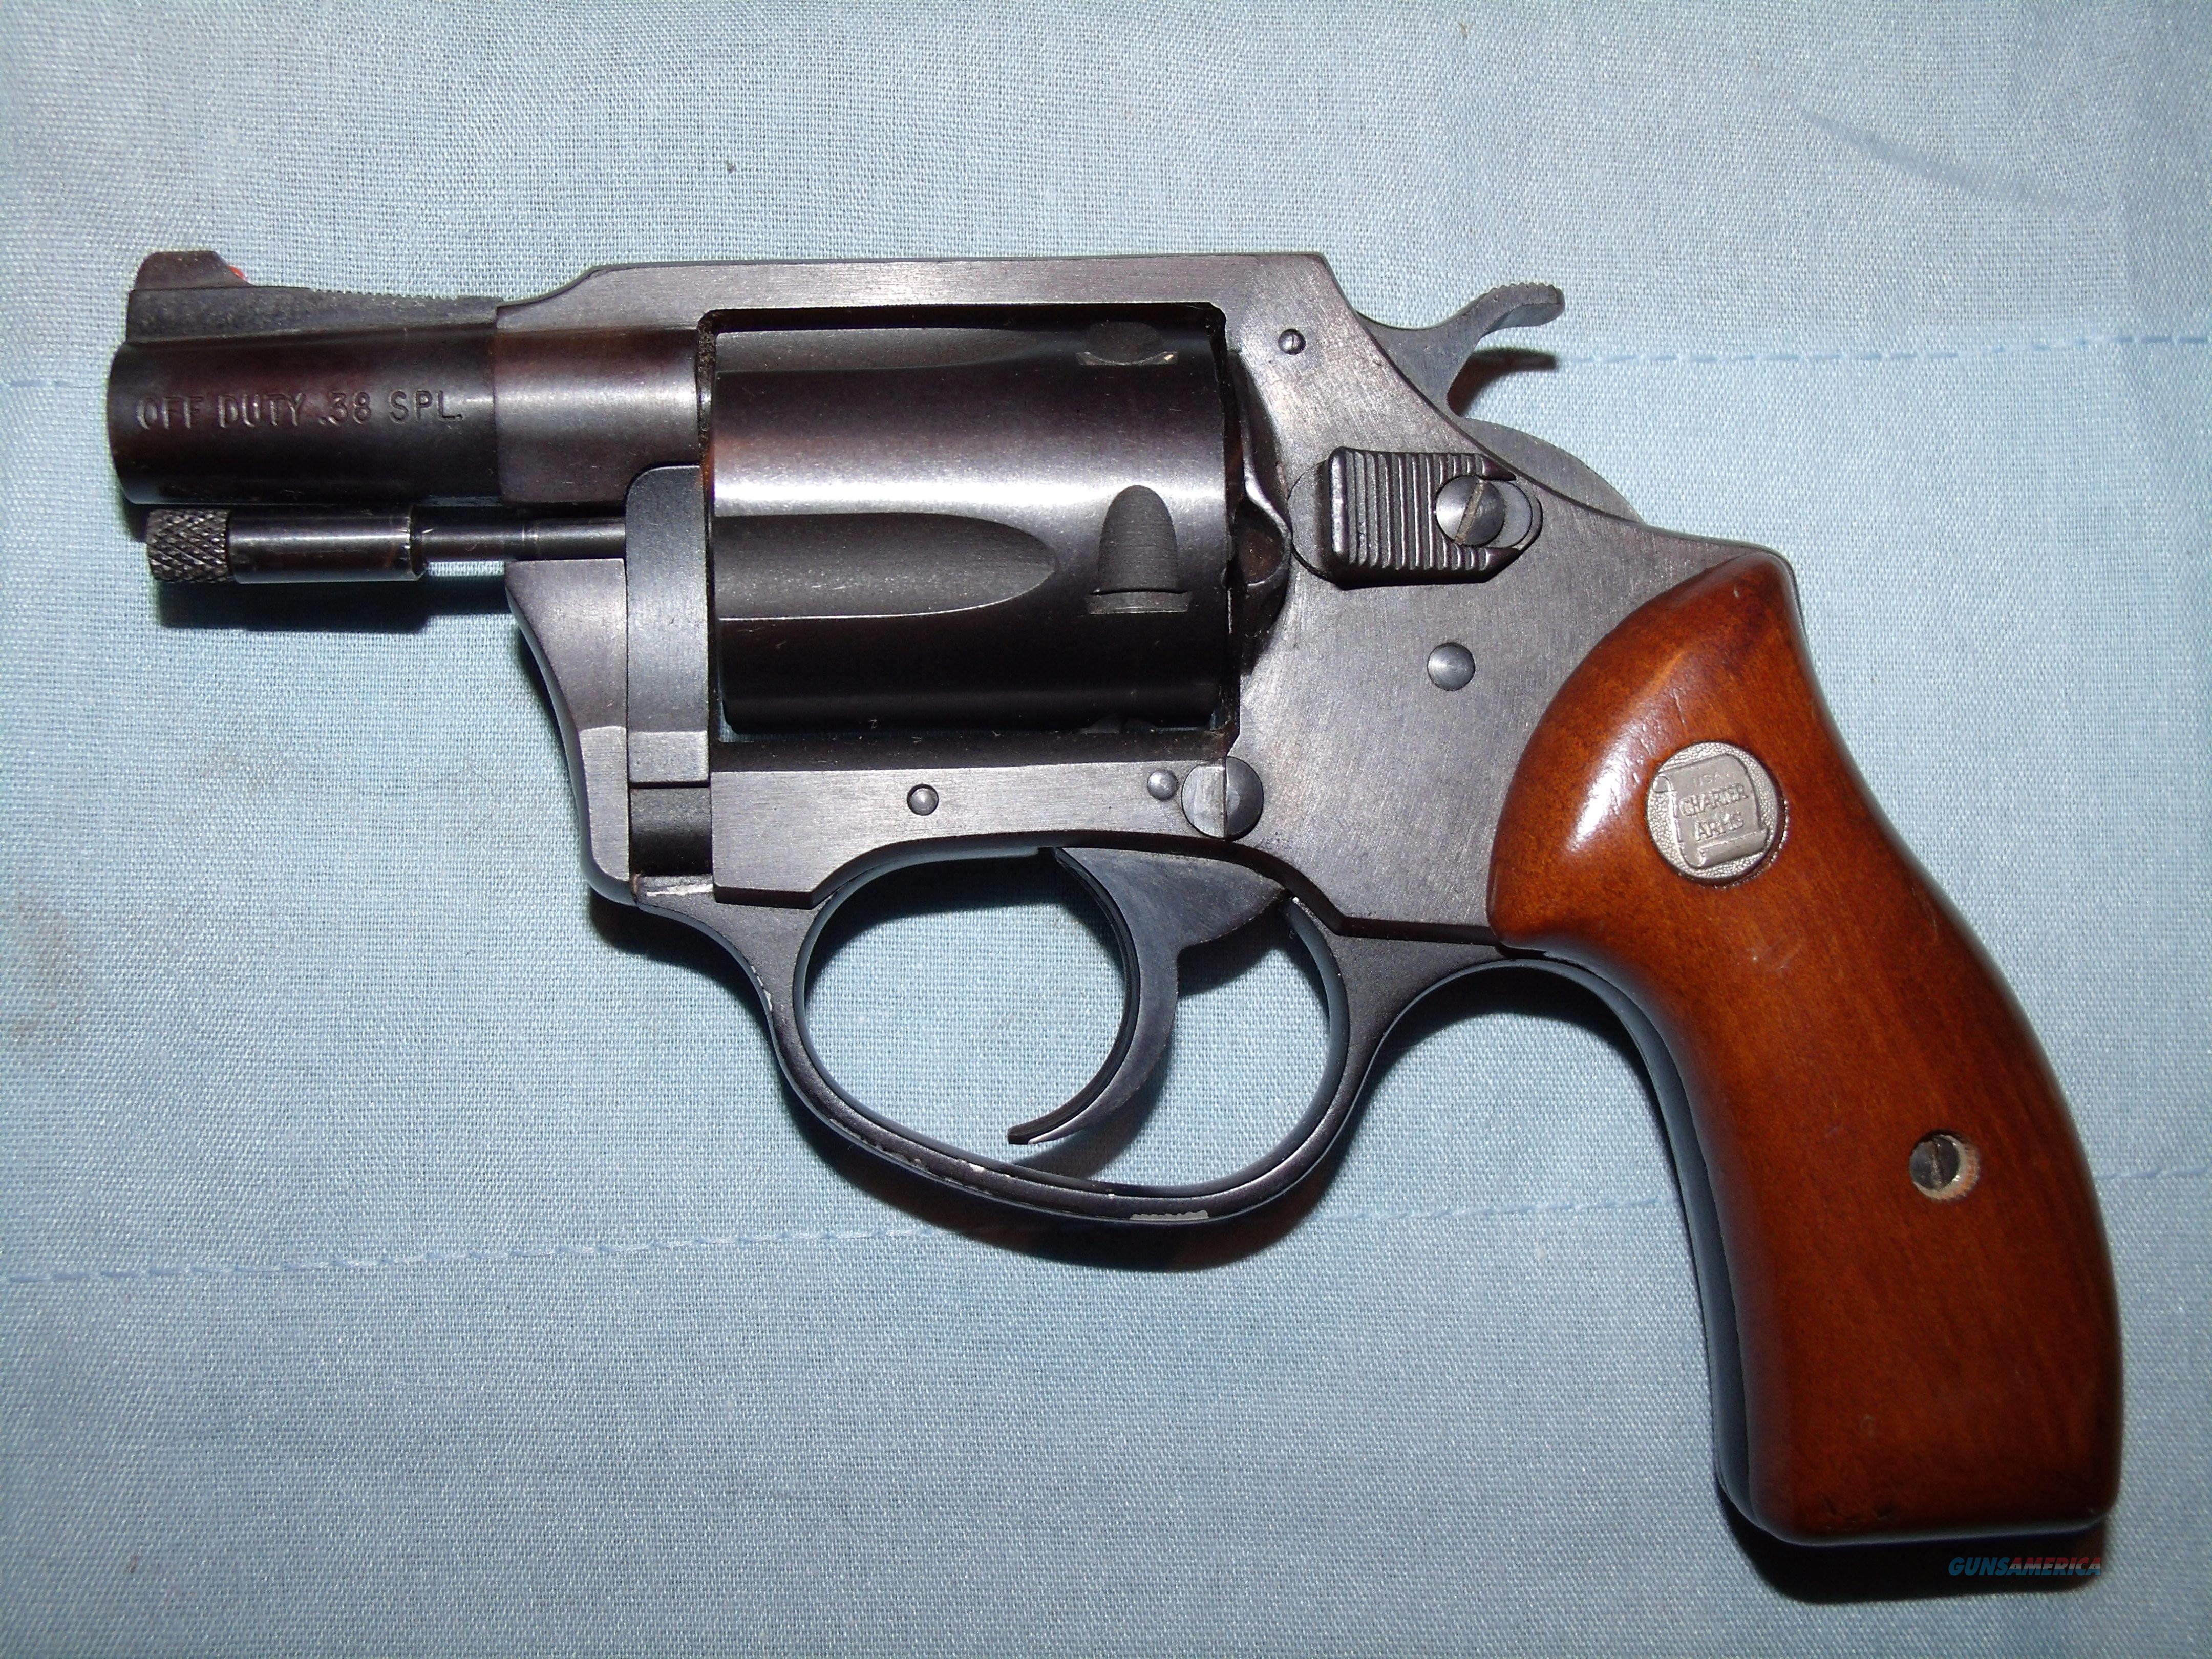 CHARTER ARMS "OFF DUTY' .38 SPECIAL for sale